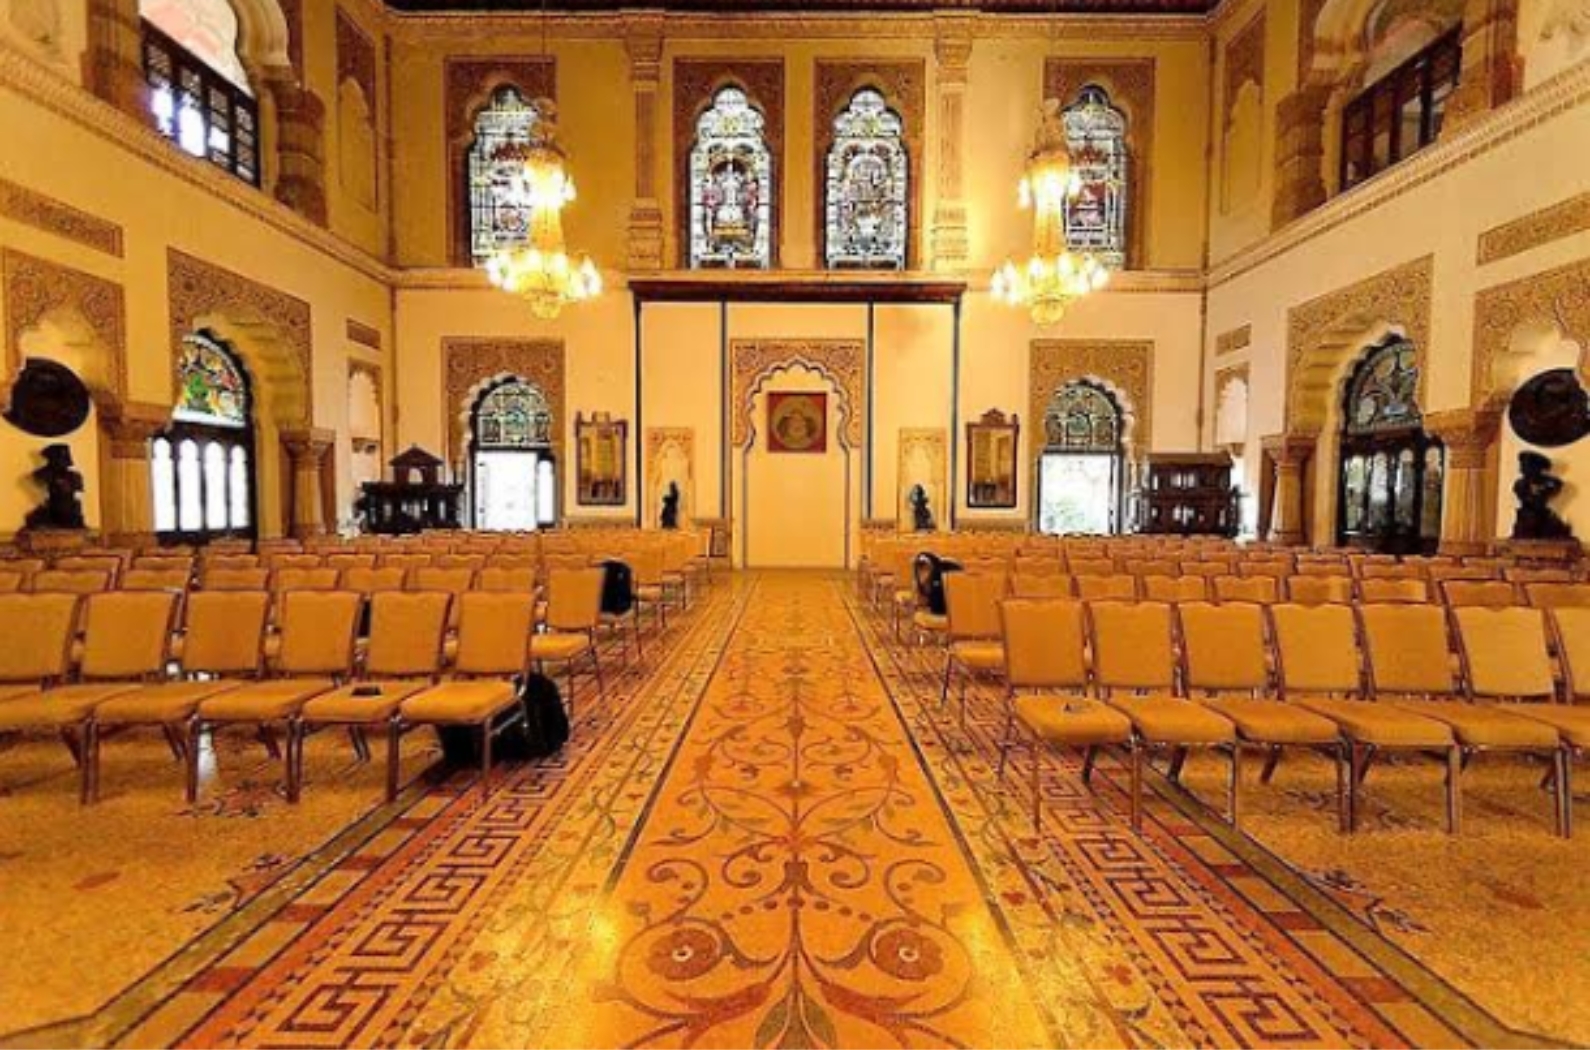 There is a Darbar Hall, which is still used as a venue for music performances and other cultural events.